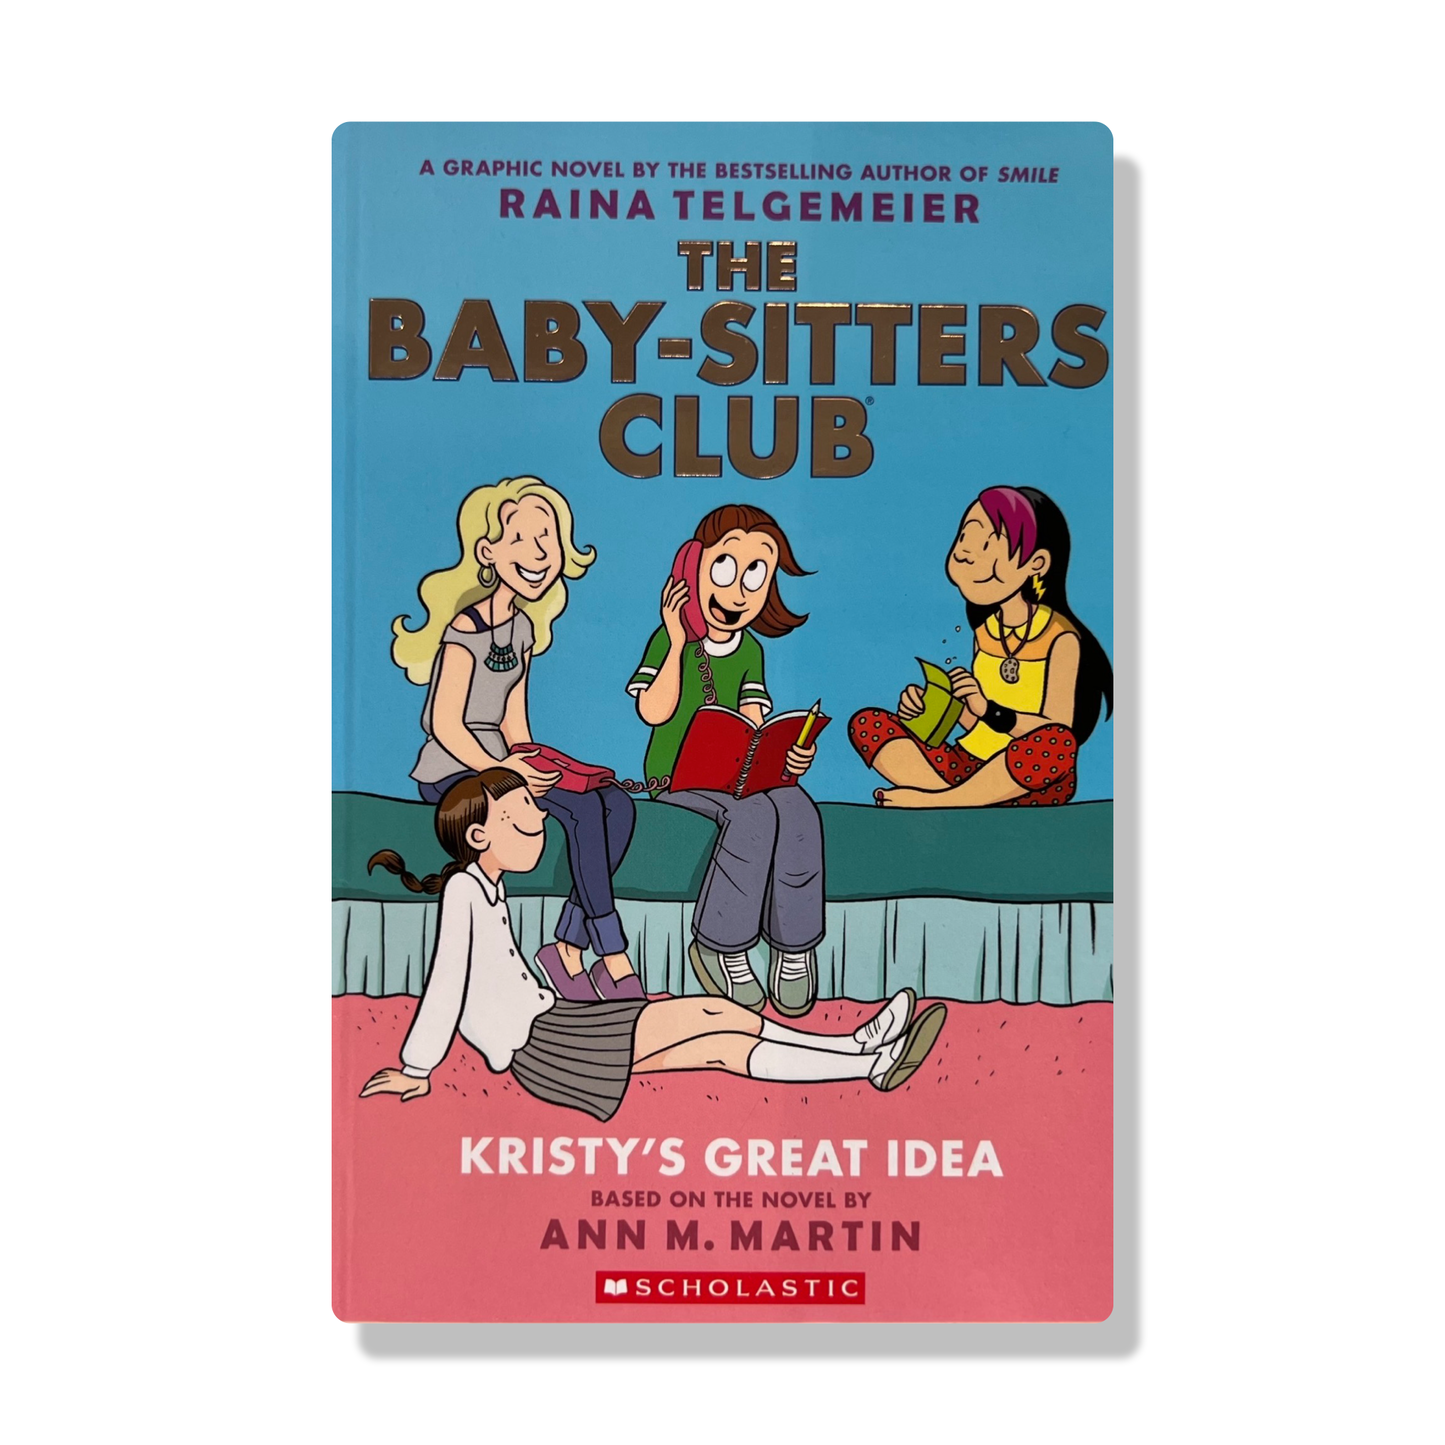 Kristy's Great Idea: A Graphic Novel (the Baby-Sitters Club #1) (Revised Edition)